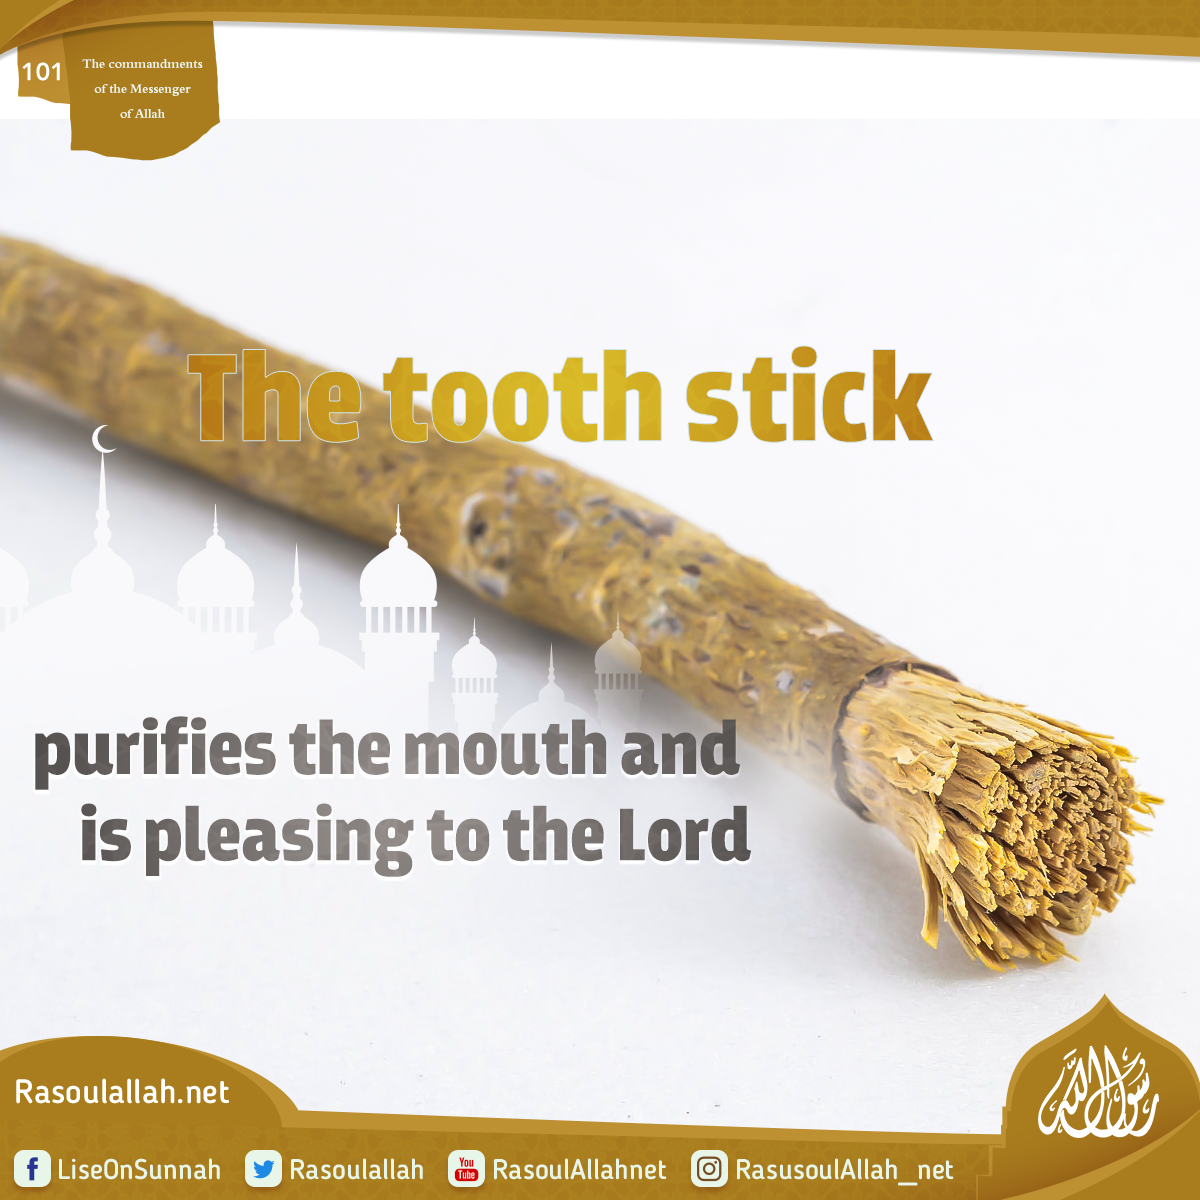 The tooth stick purifies the mouth and is pleasing to the Lord